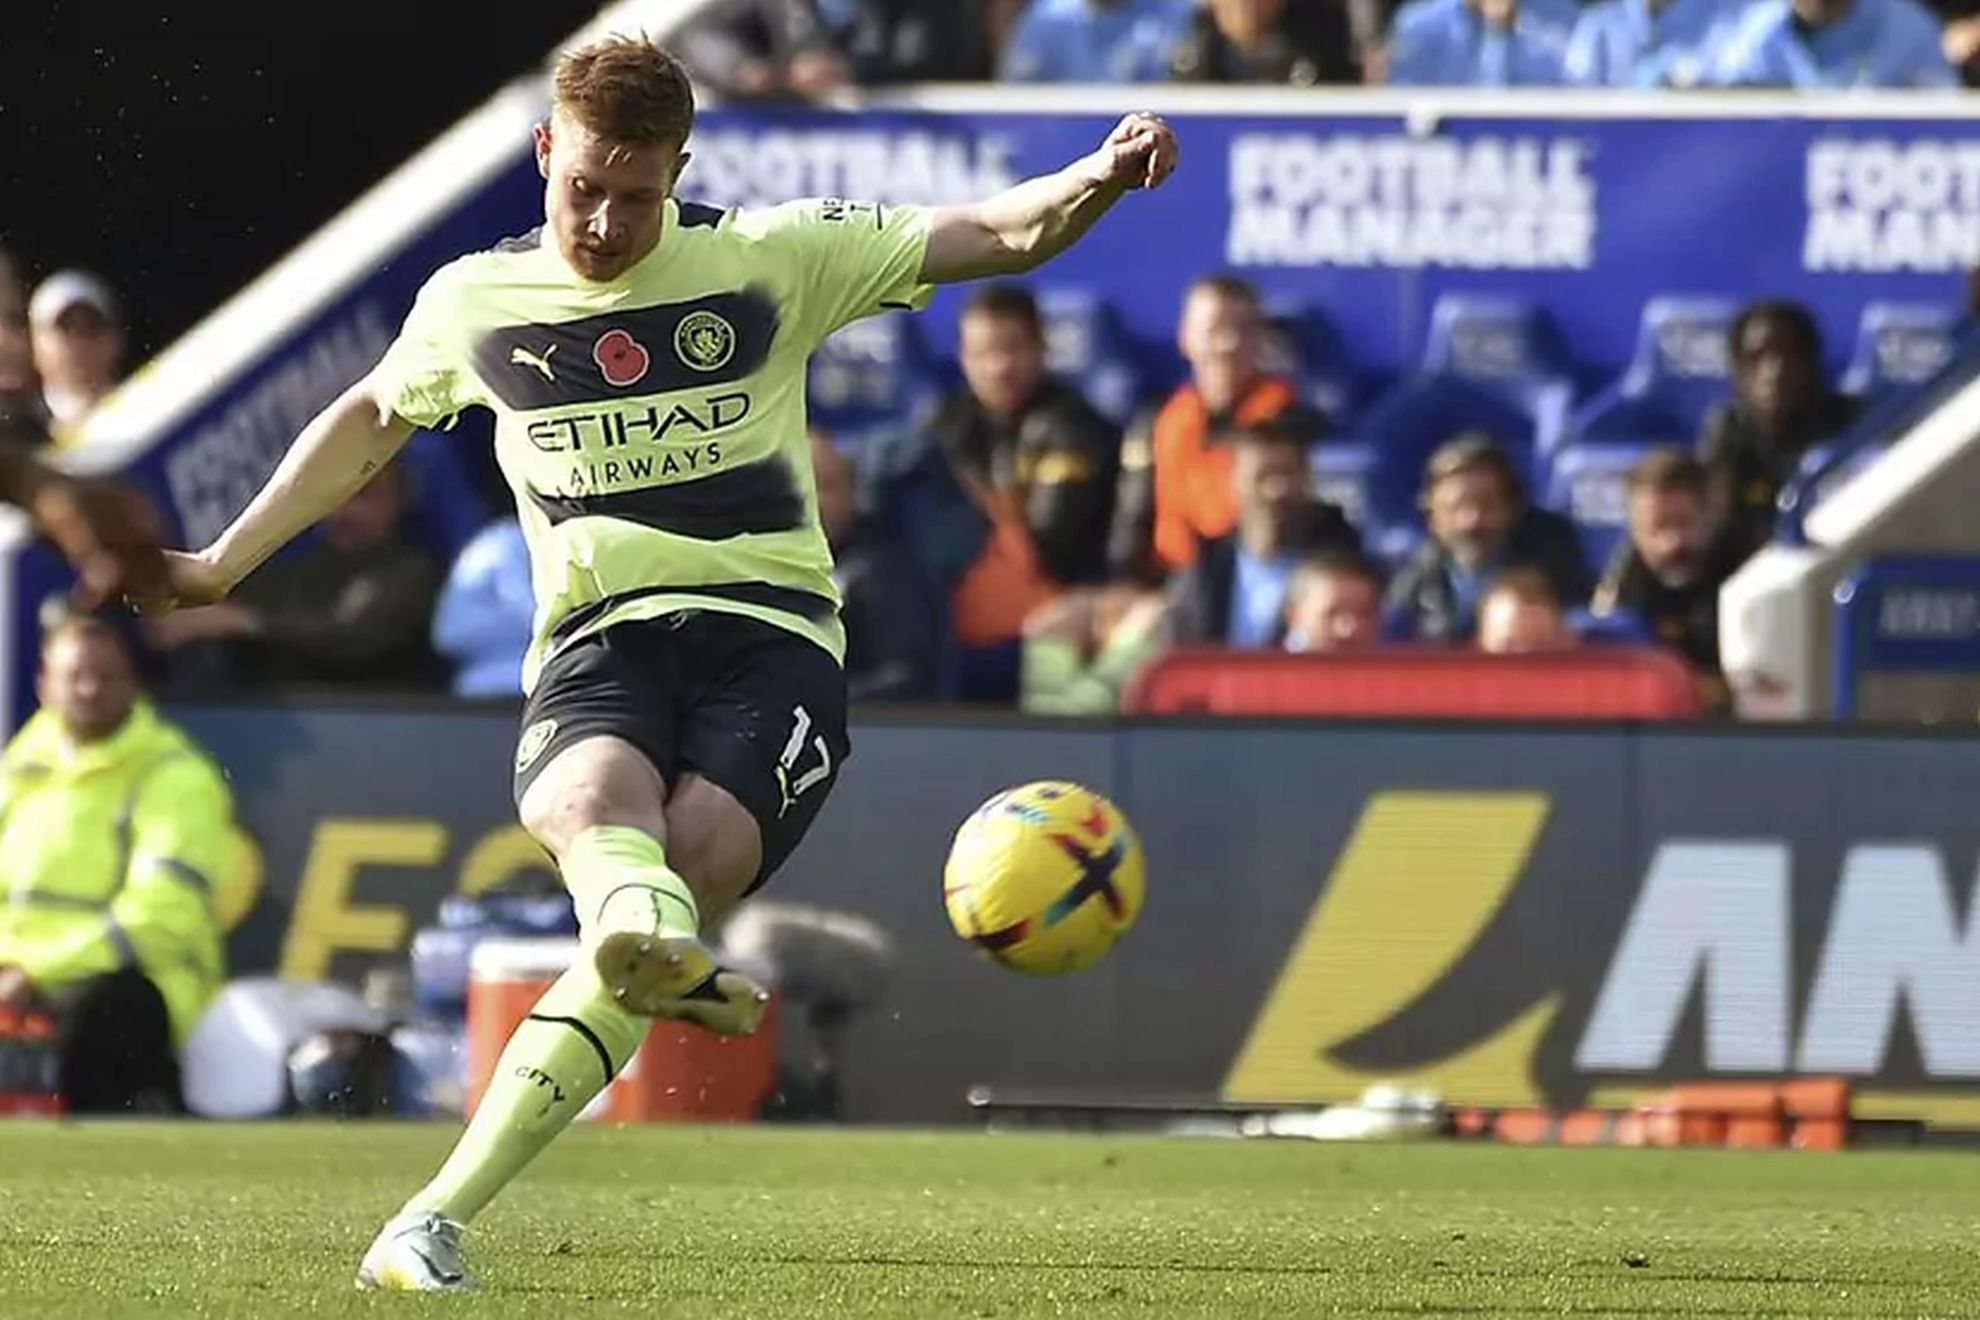 De Bruyne's brilliant freekick sees Manchester City go top without Haaland